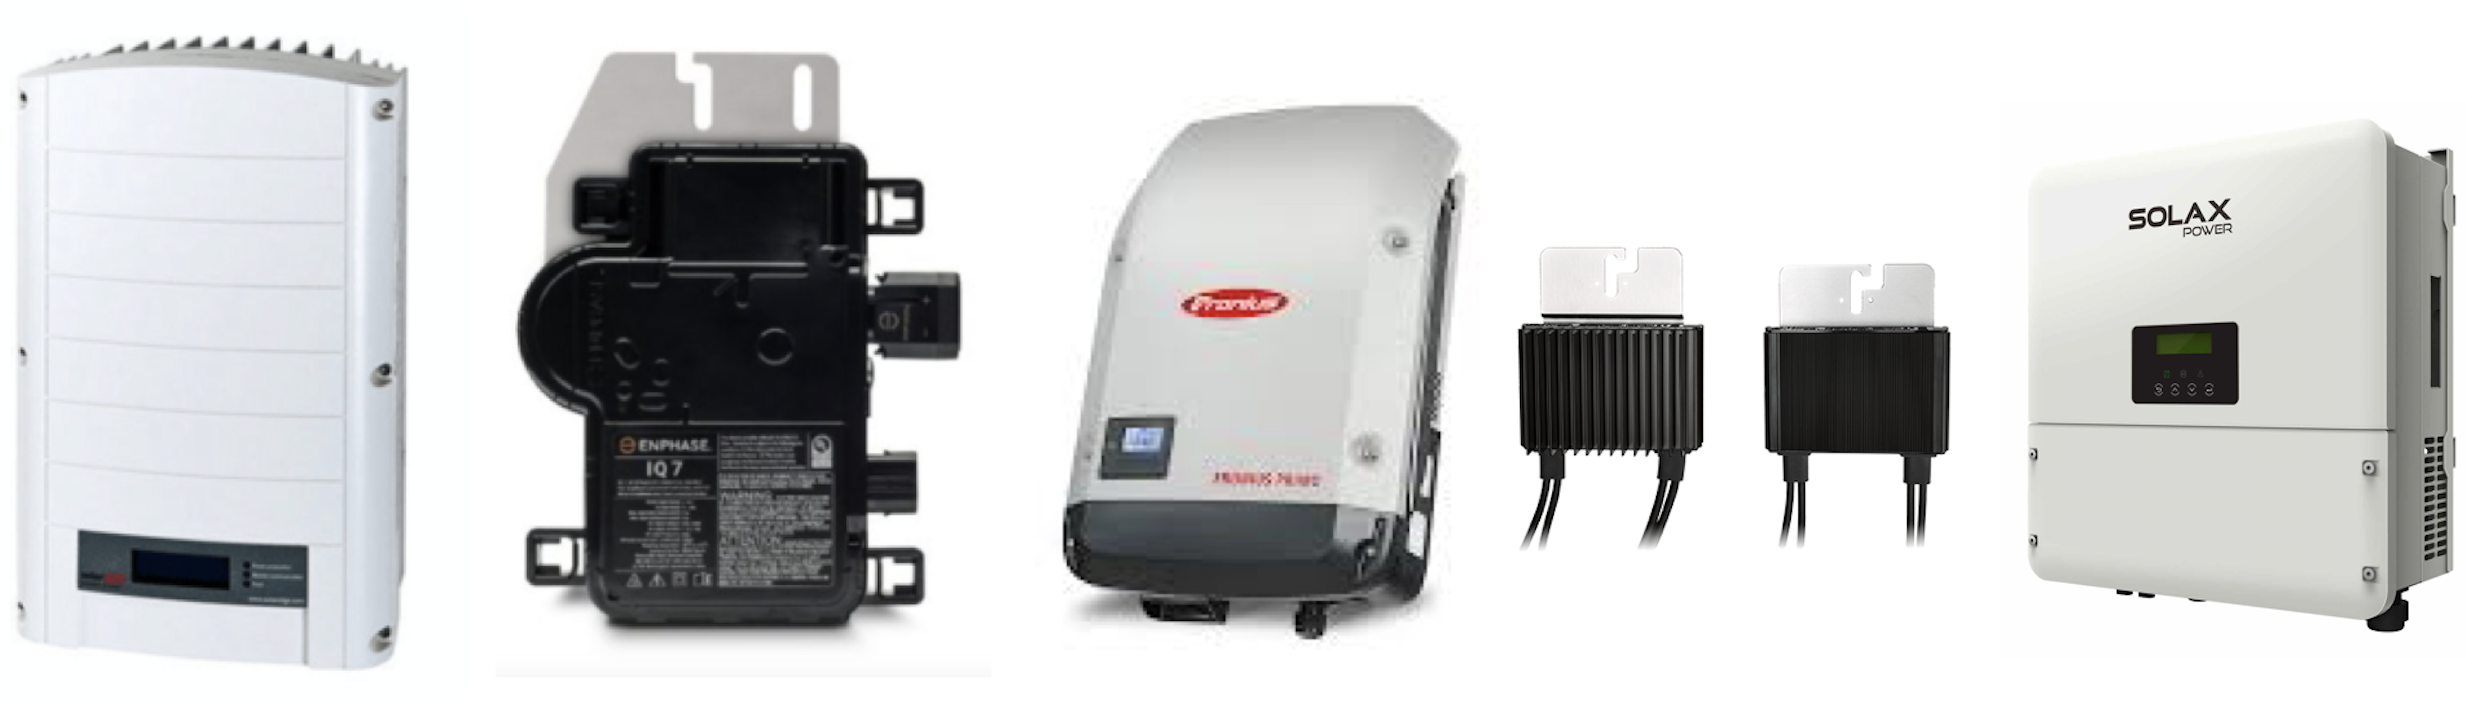 5 Great Solar Inverters - What Should You Buy?